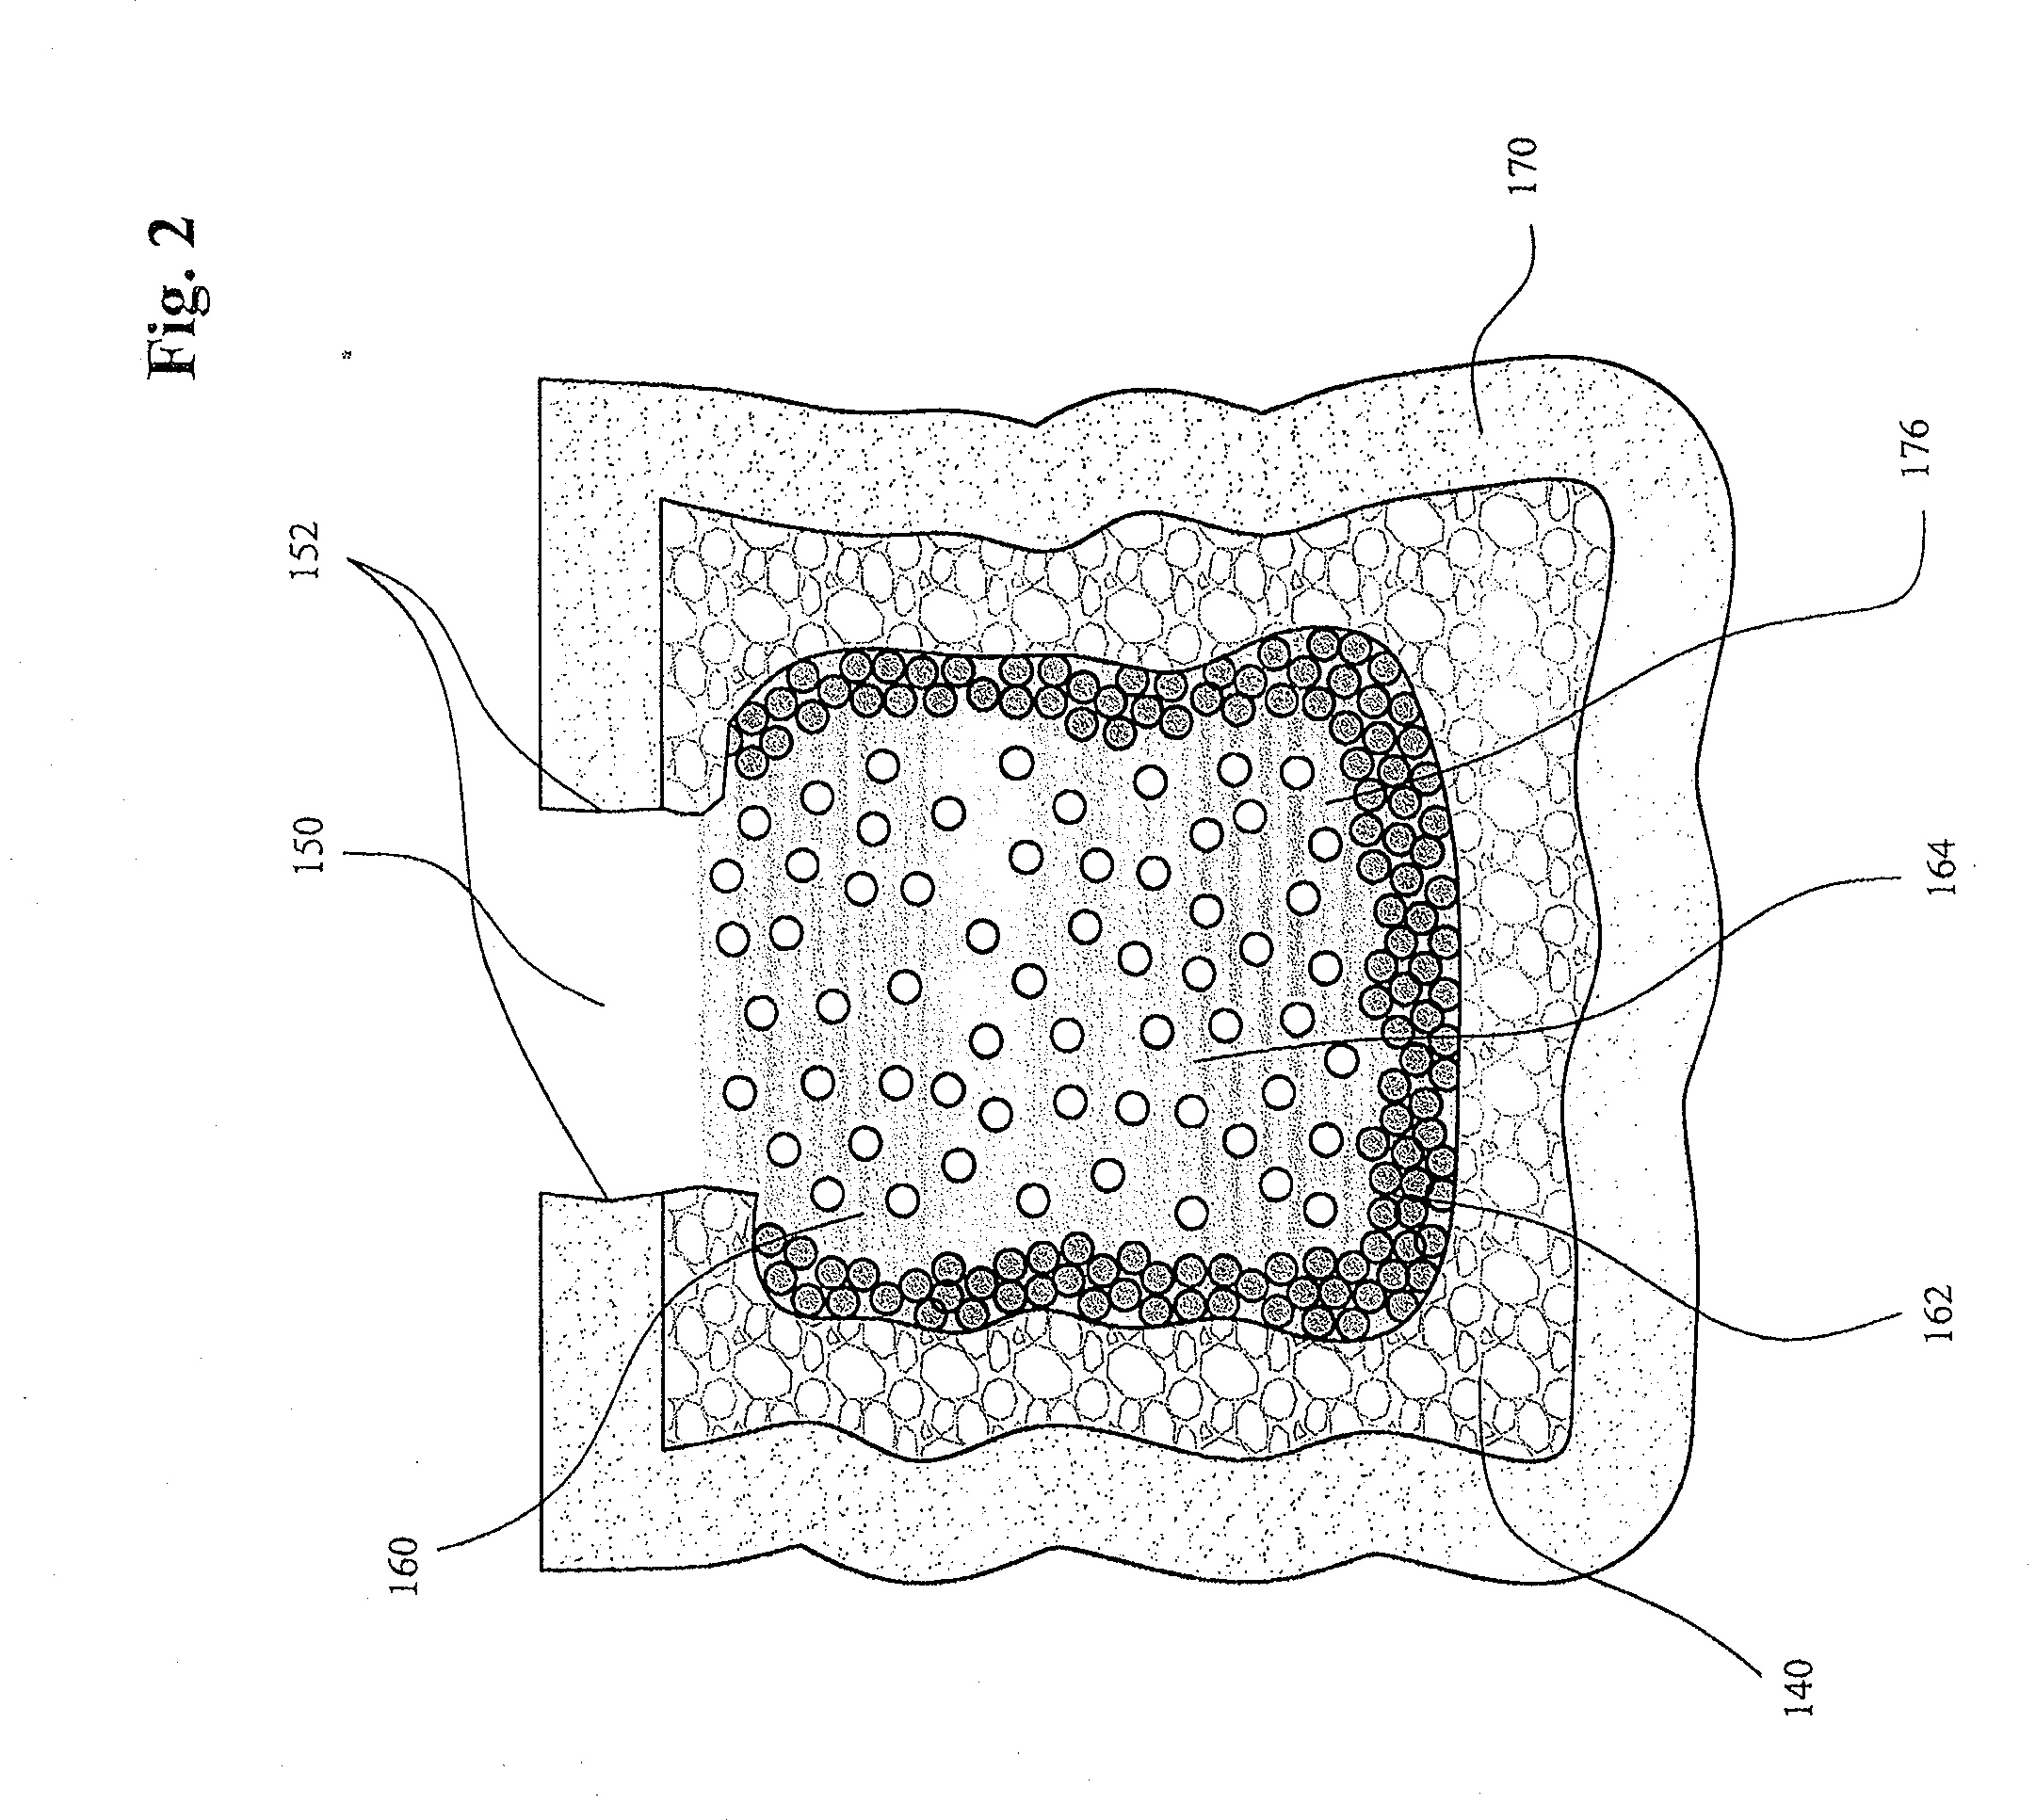 Bone cement composite containing particles in a non-uniform spatial distribution and devices for implementation